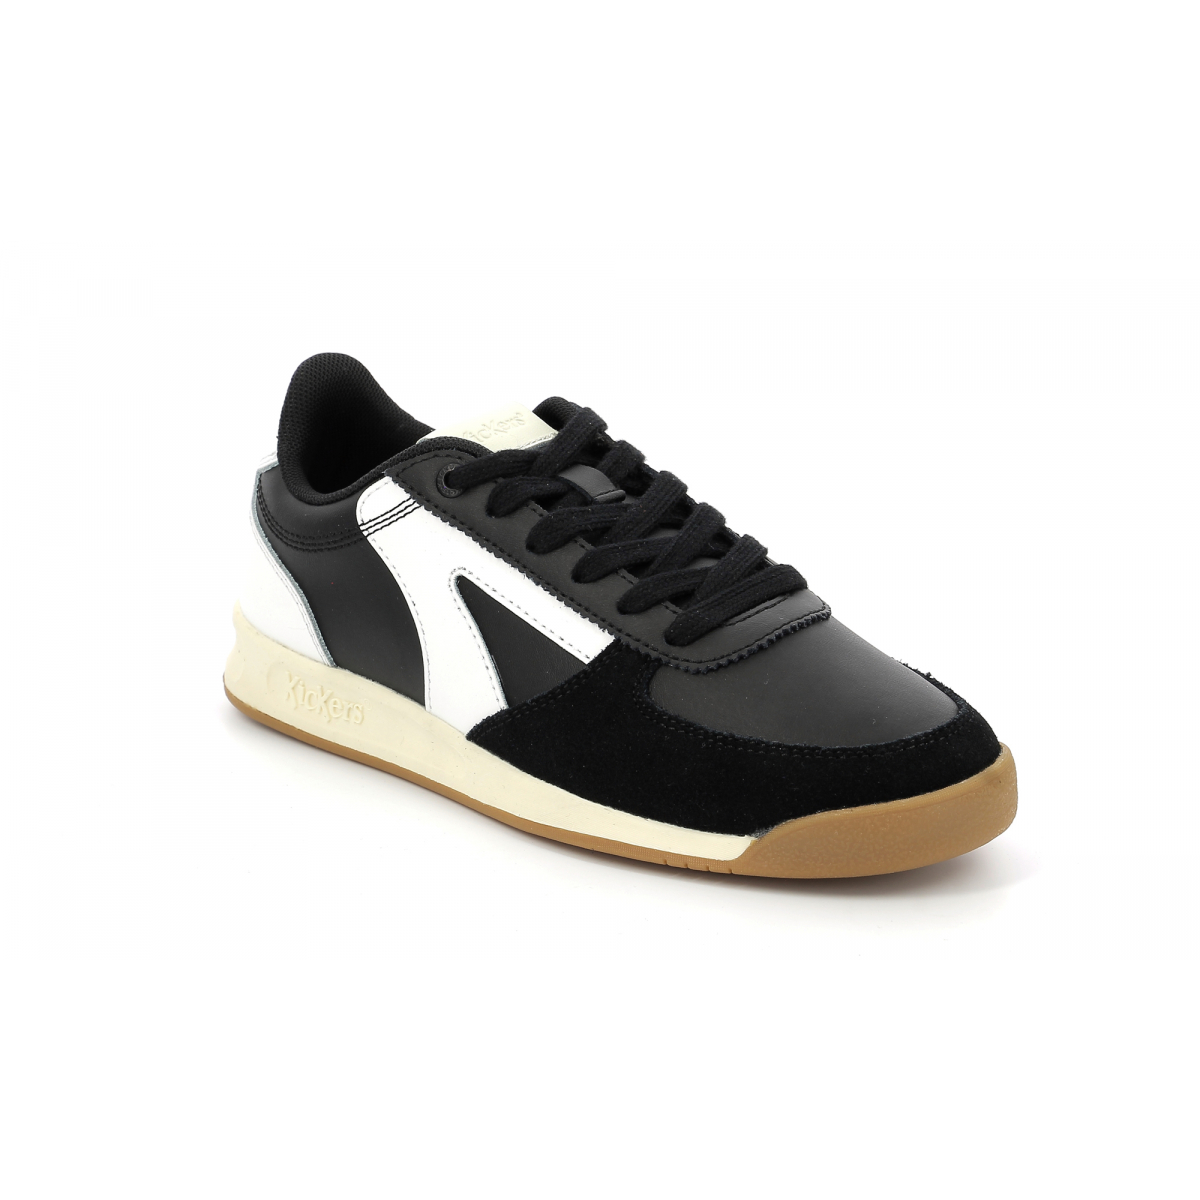 Kick Krack black and white sneakers for woman - Kickers © Official website